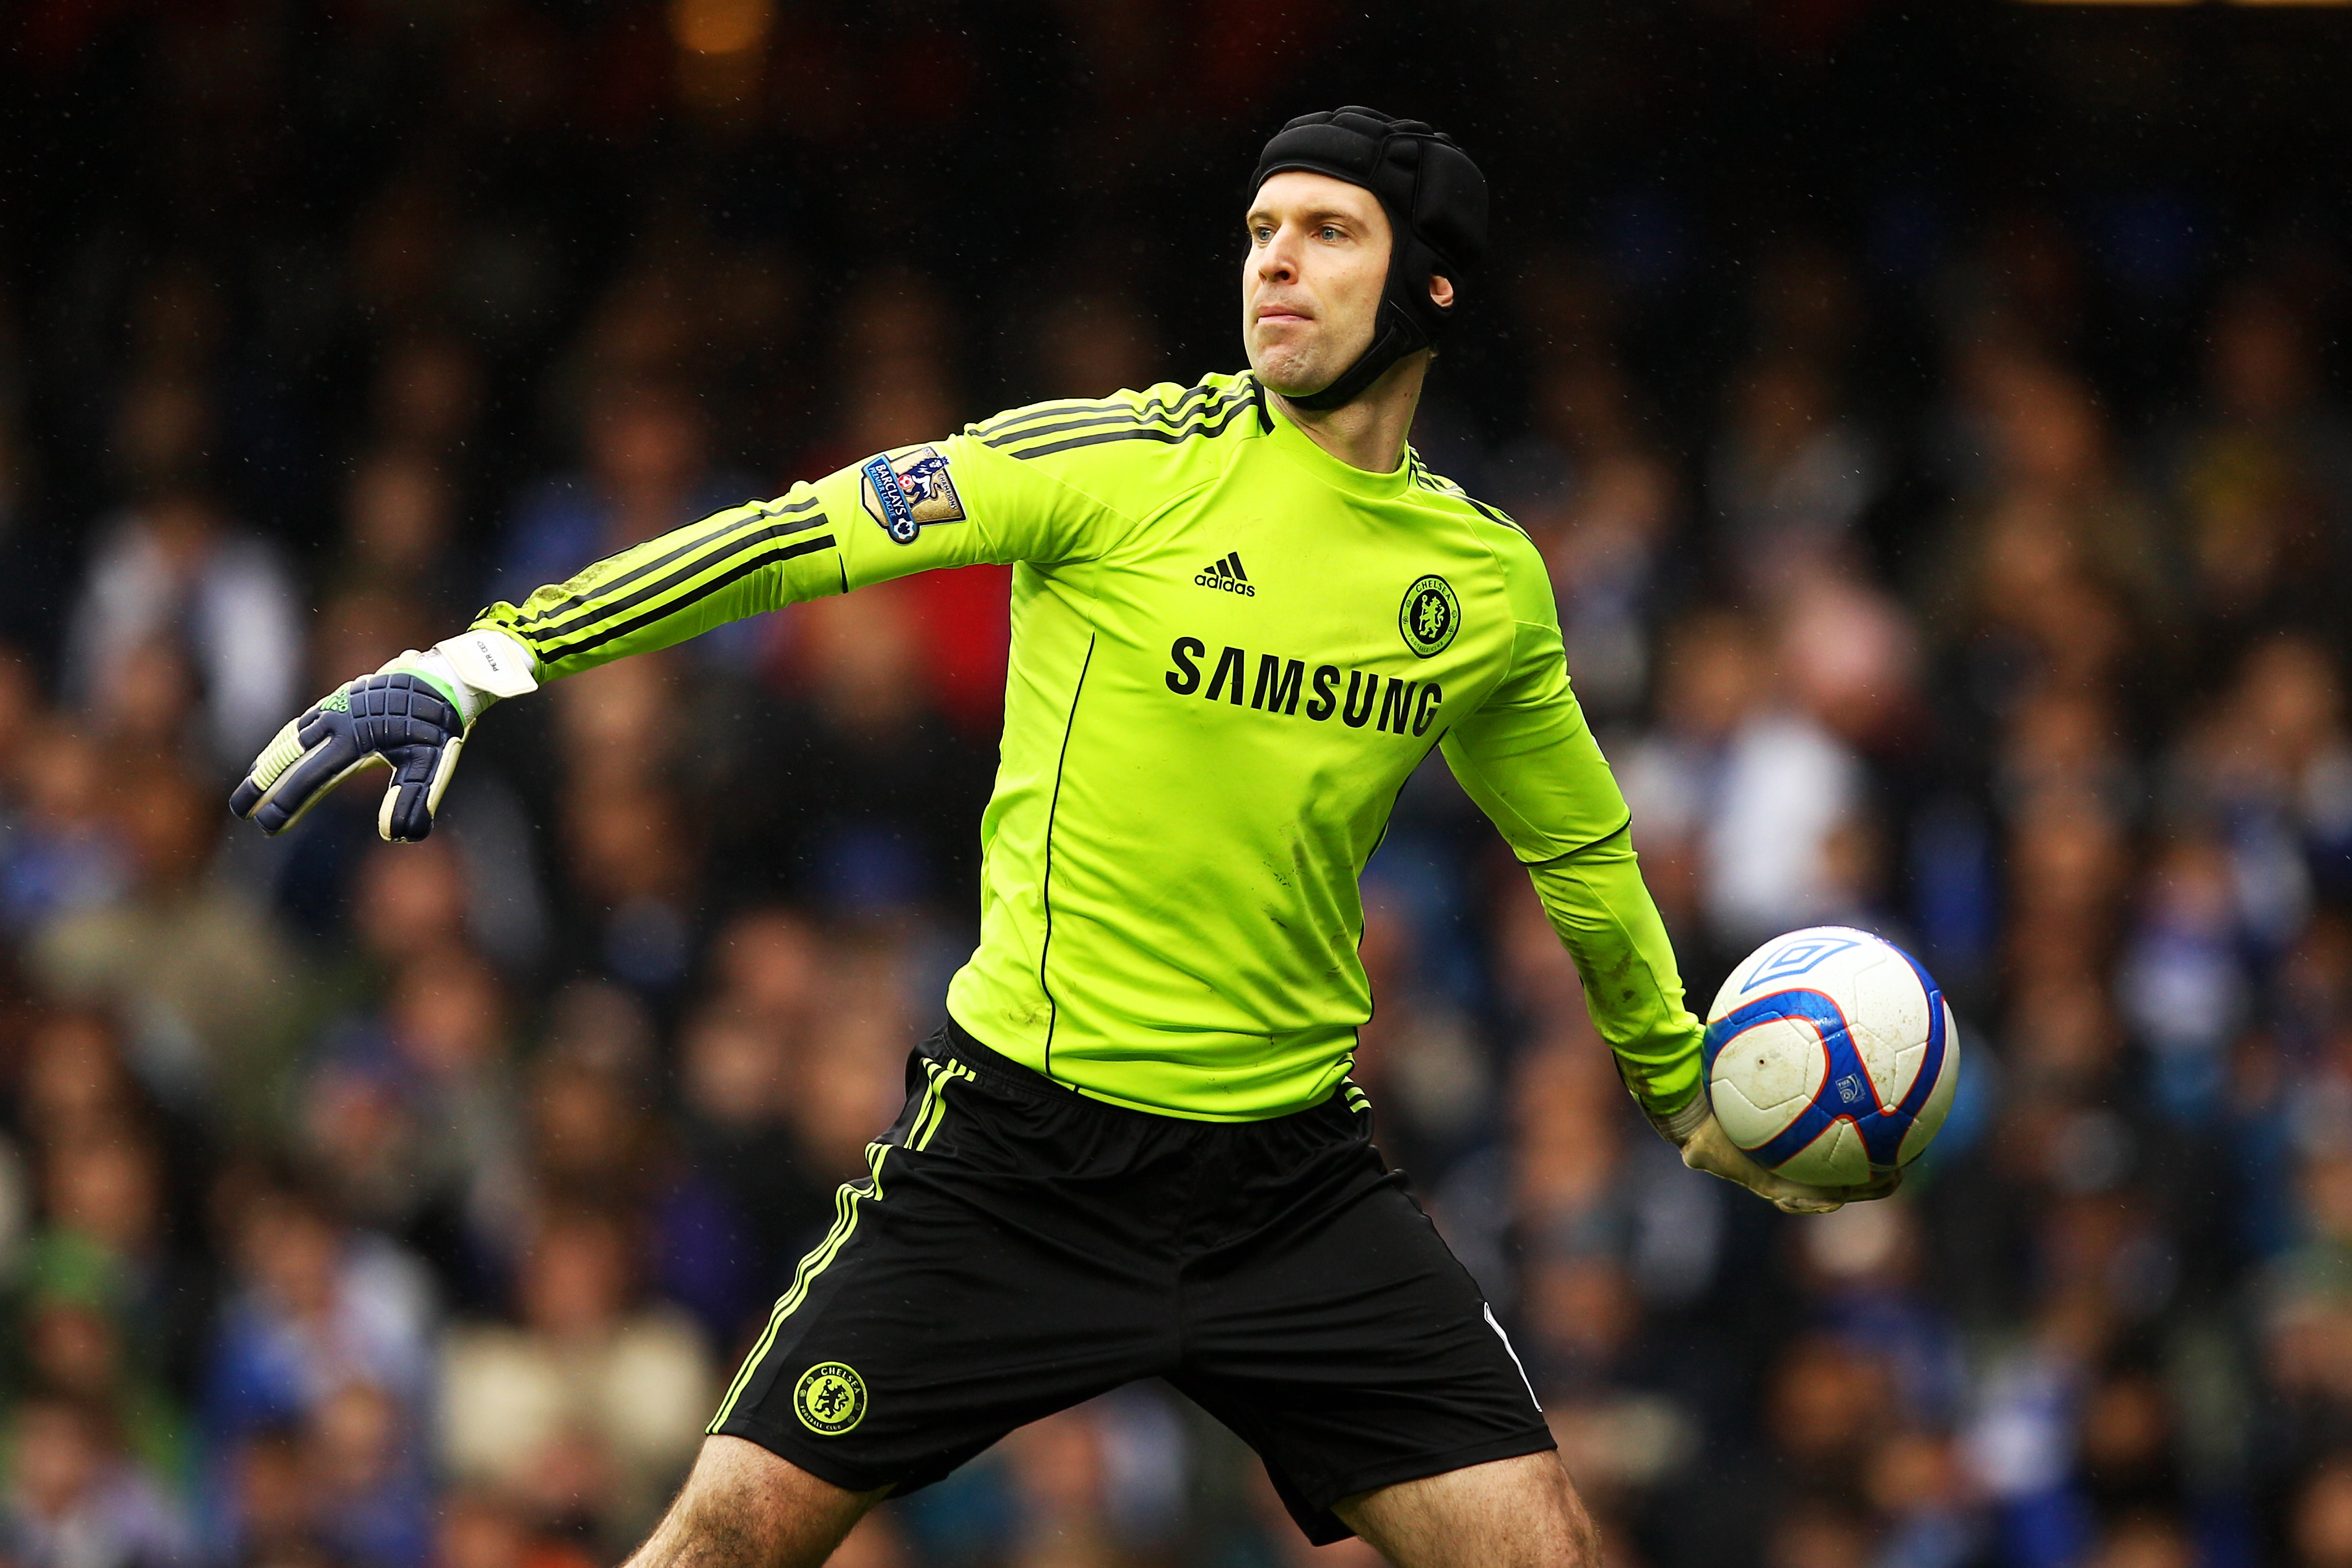 LONDON, ENGLAND - FEBRUARY 19:  Goalkeeper Petr Cech of Chelsea throws out the ball during the FA Cup sponsored by E.ON 4th round replay match between Chelsea and Everton at Stamford Bridge on February 19, 2011 in London, England.  (Photo by Richard Heath